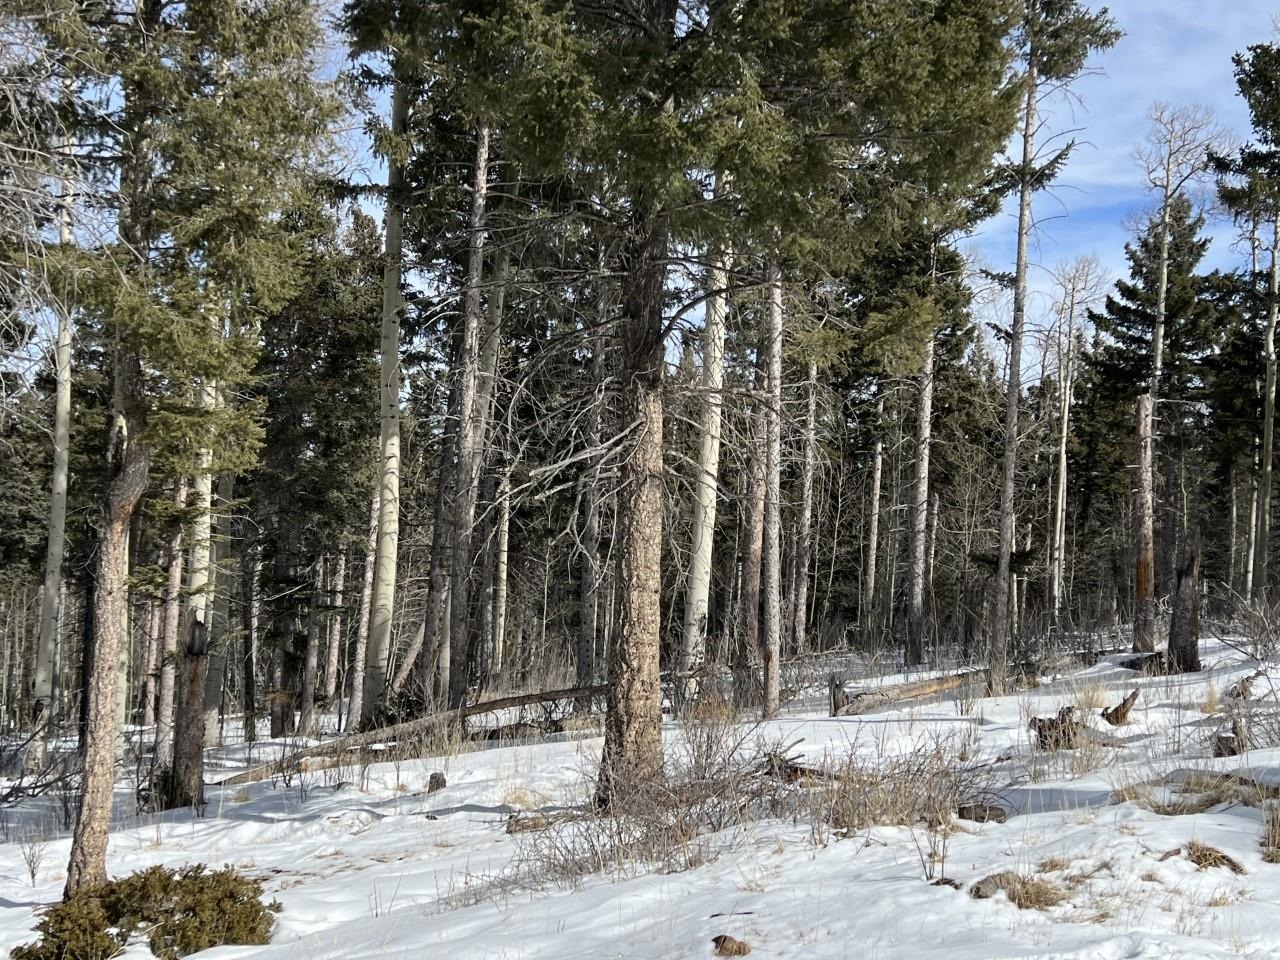 This gorgeous lot offers great privacy and serenity tucked in the woods. So much space to roam on almost 5 acres of forested land abundant in wildlife. Just a 20 minute drive to the PGA rated golf course, the ski resort and all the other Angel Fire amenities.